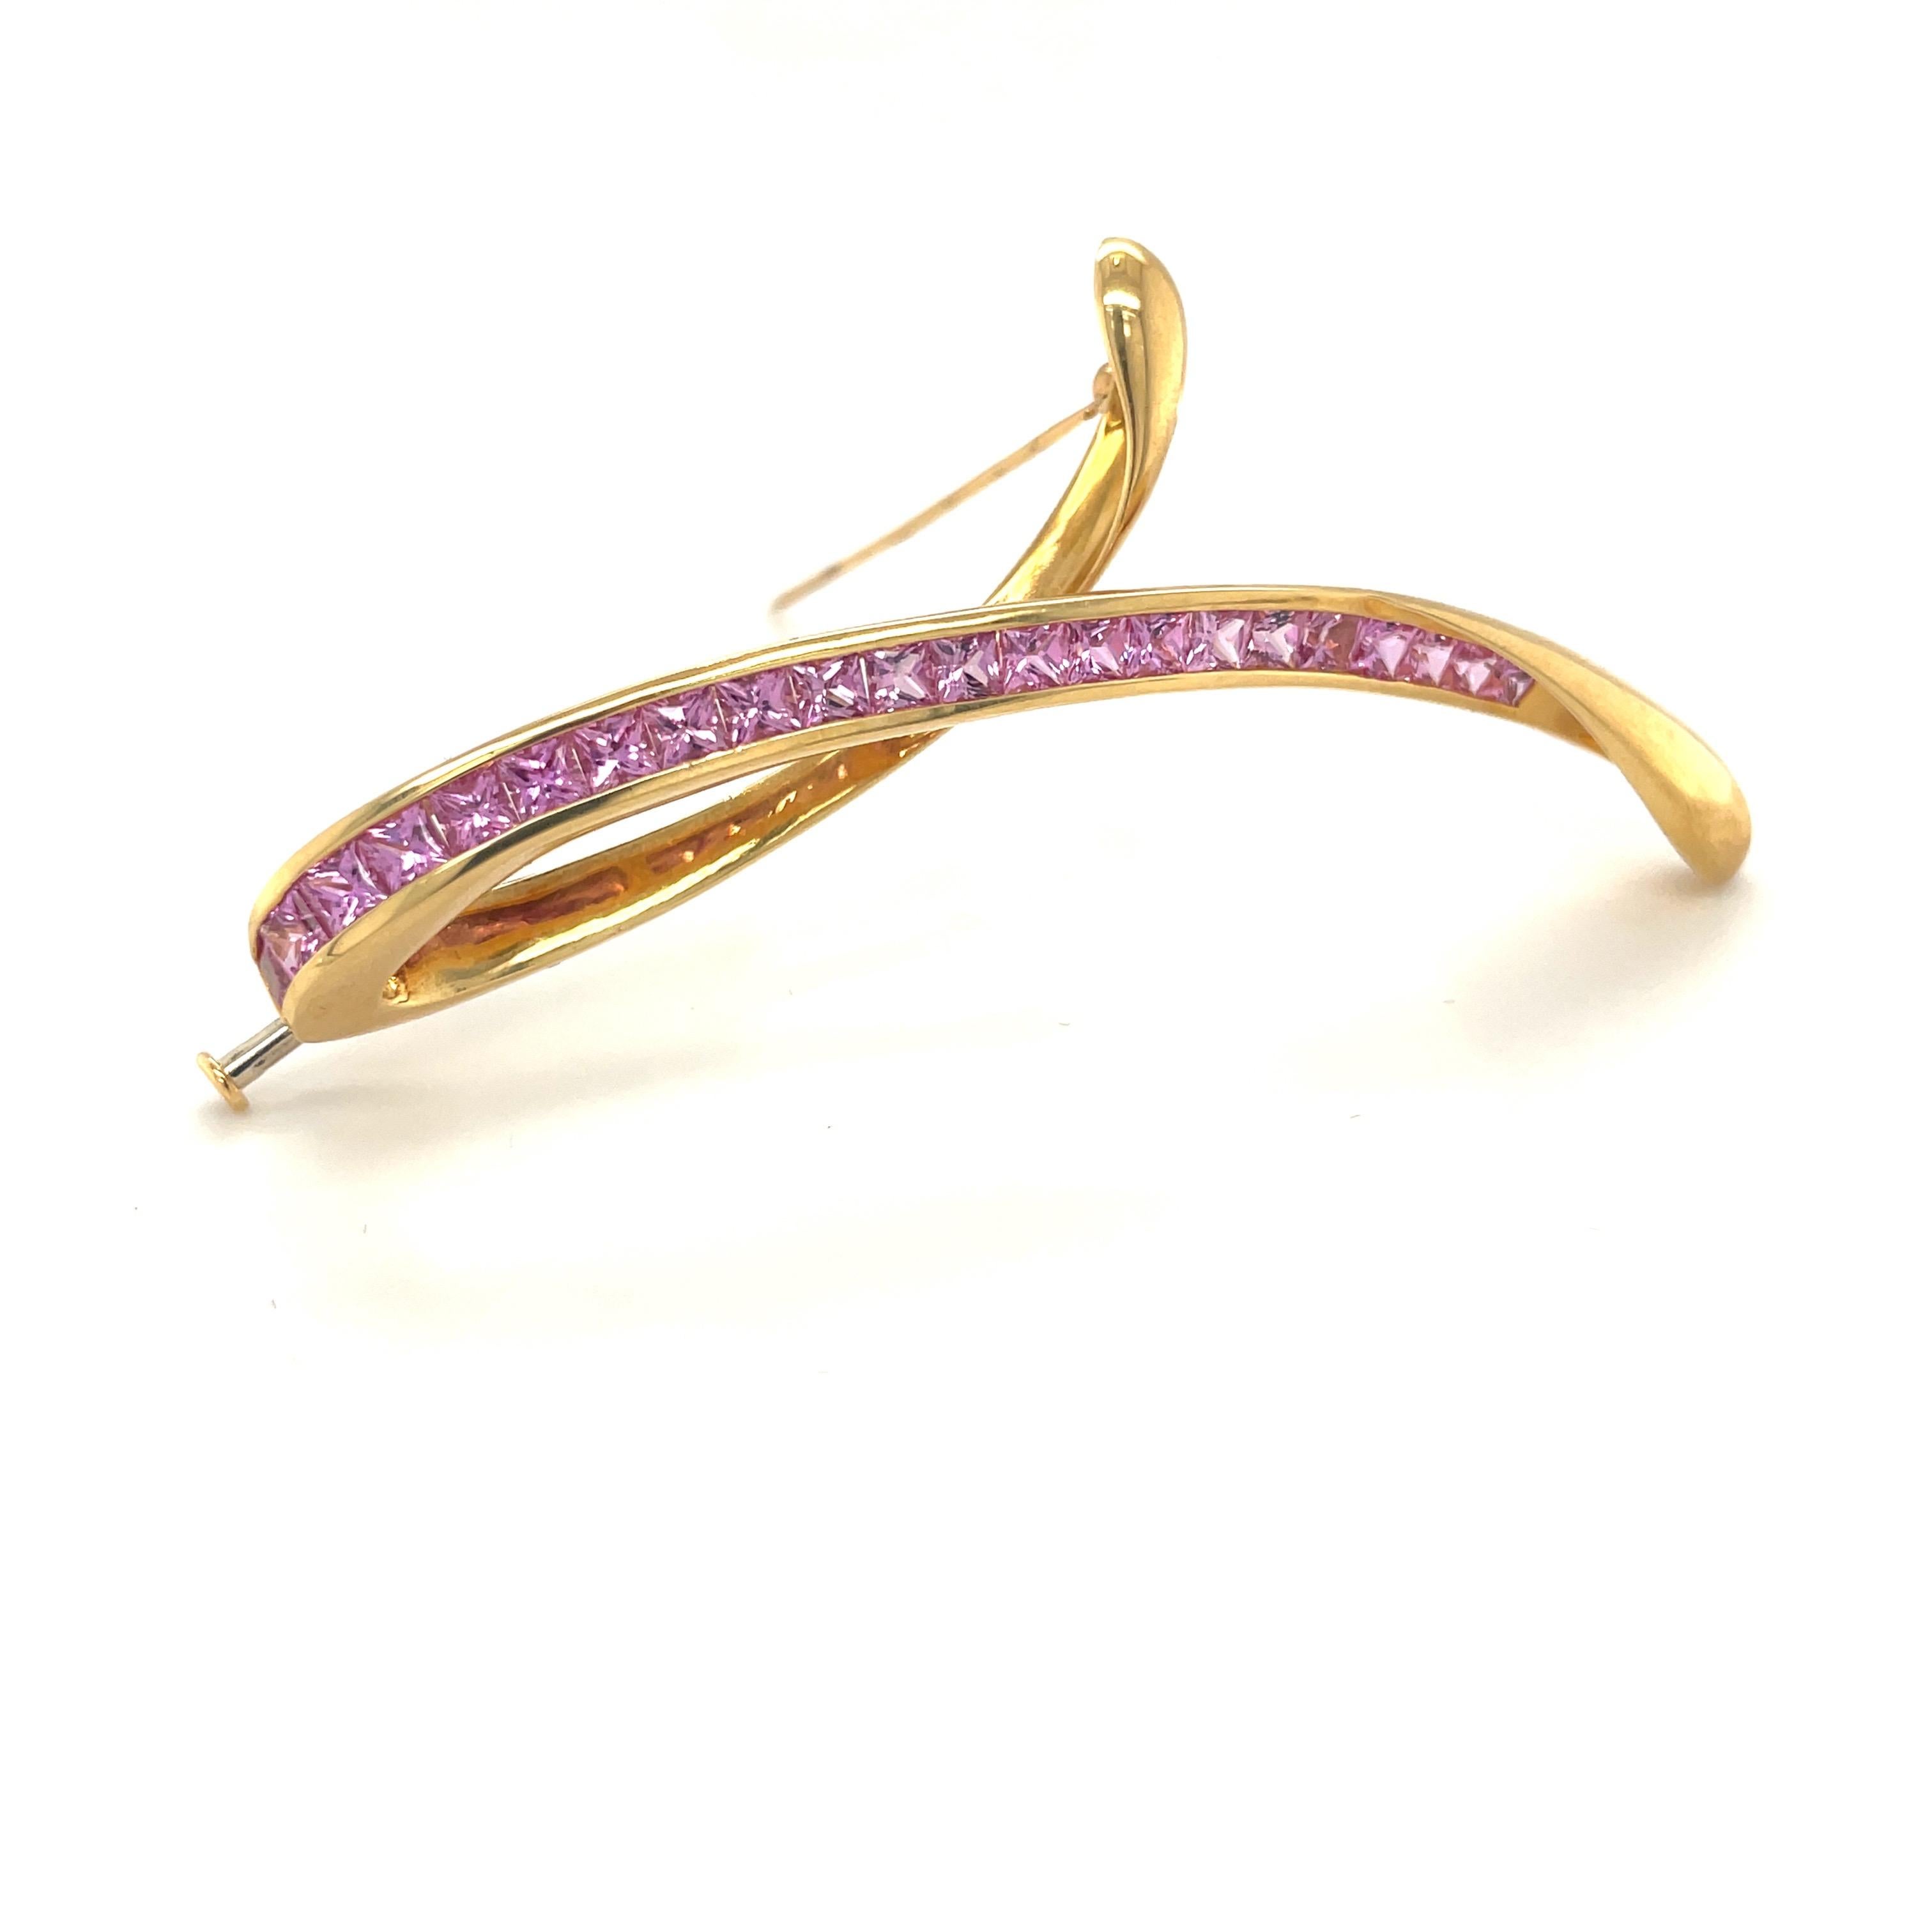 Princess Cut Cellini 18kt Yellow Gold 4.12 Ct Pink Sapphire Ribbon Brooch For Sale